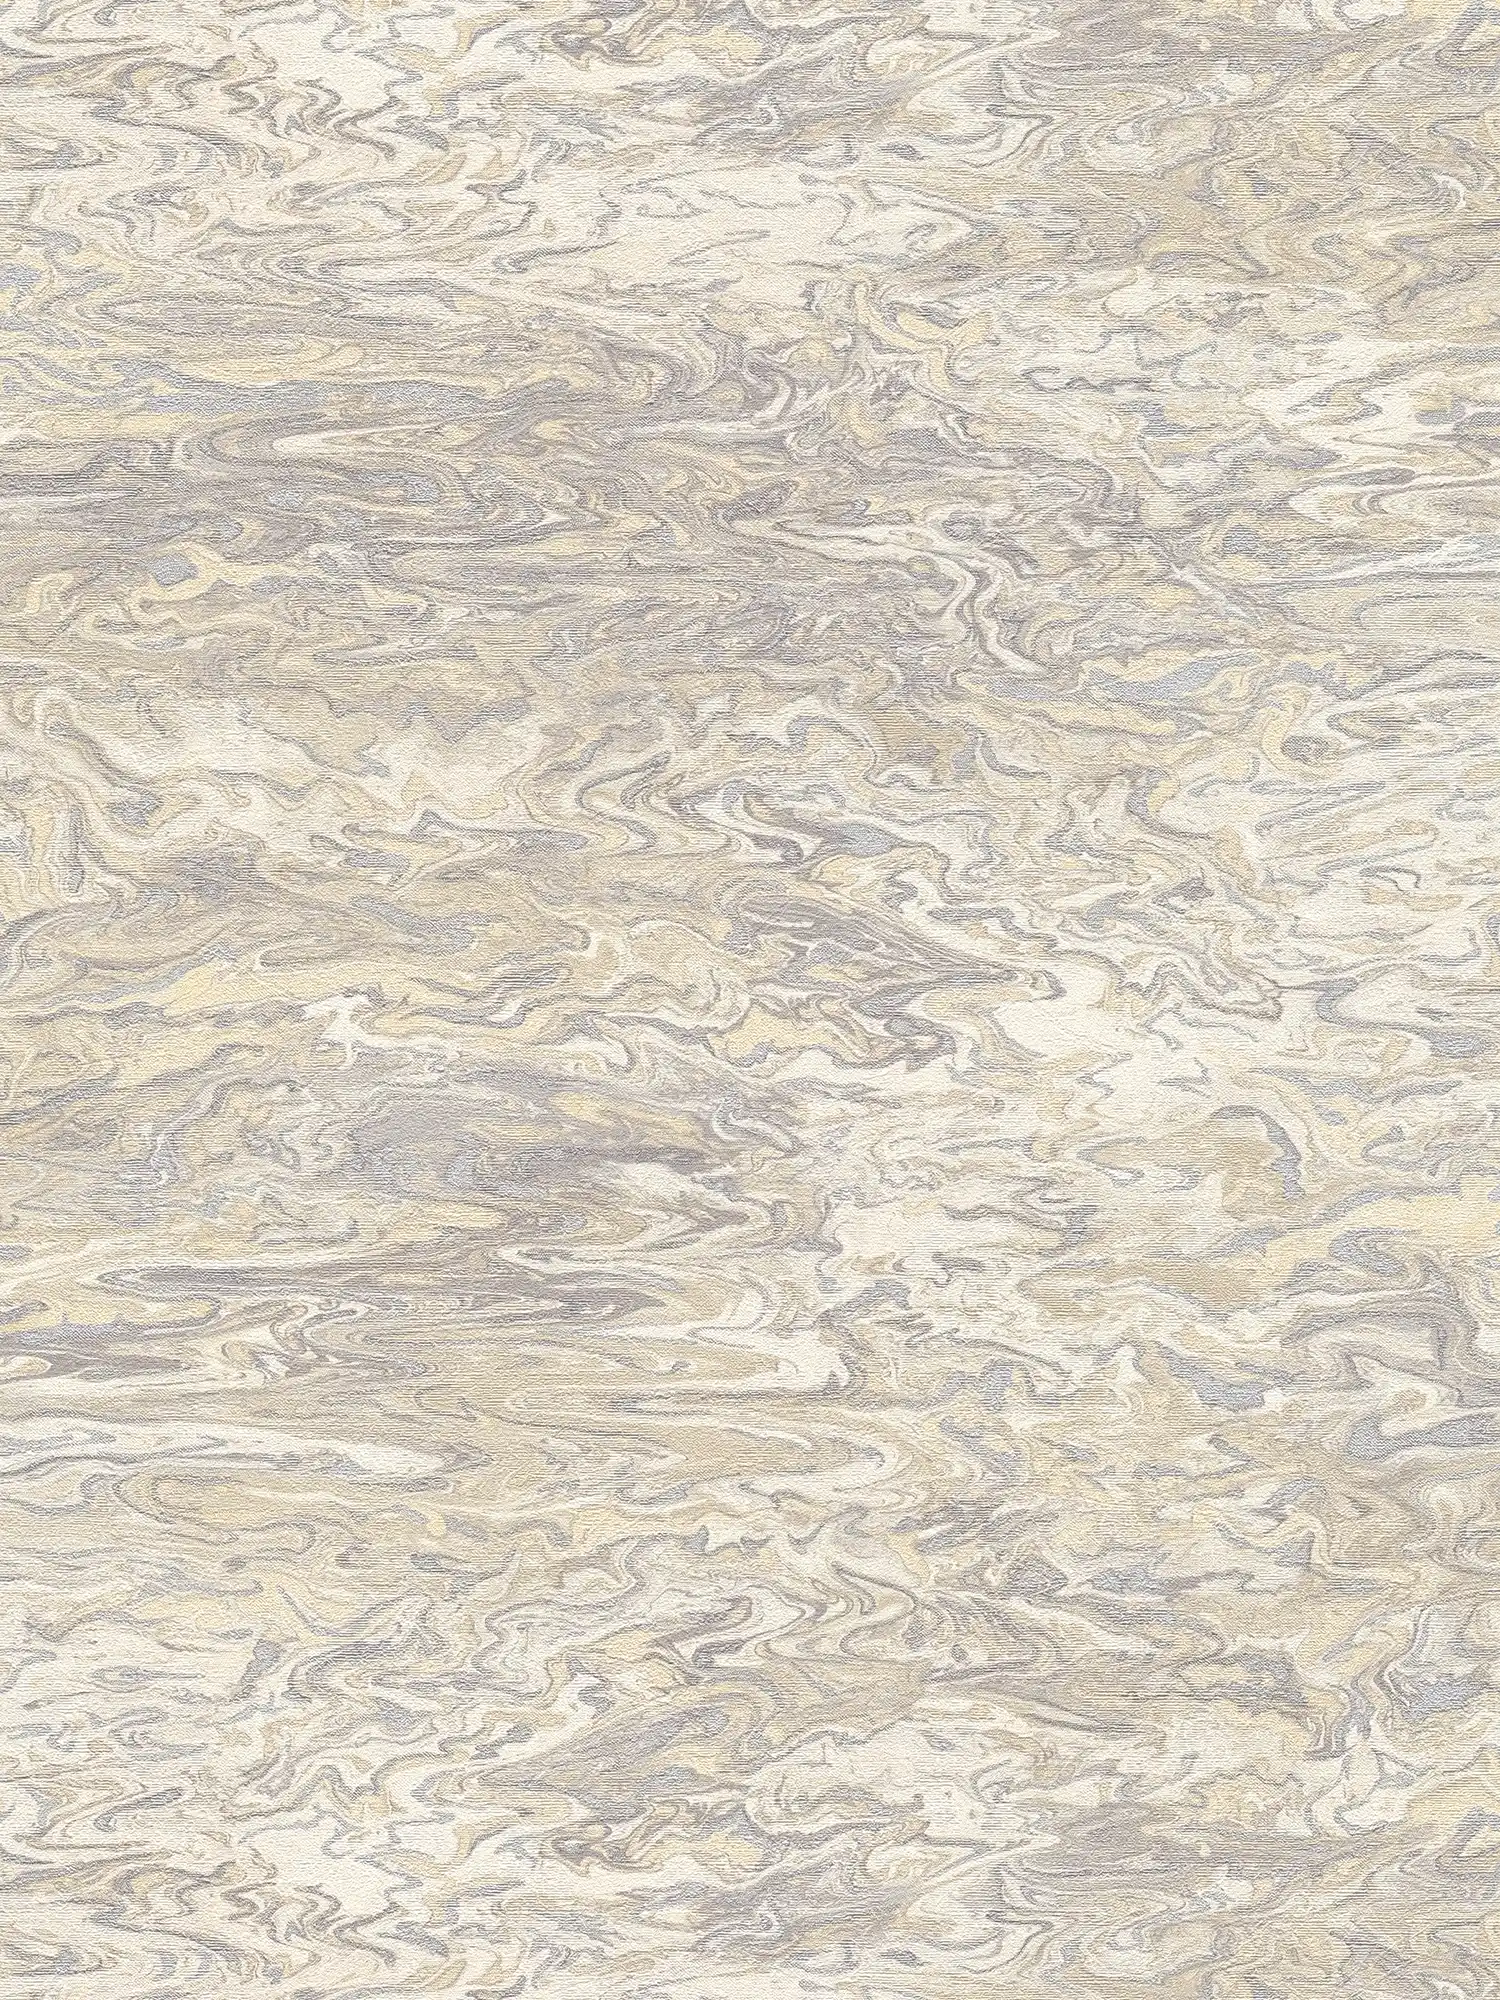 Marbled wallpaper Marble Paper effect - white, beige, cream
